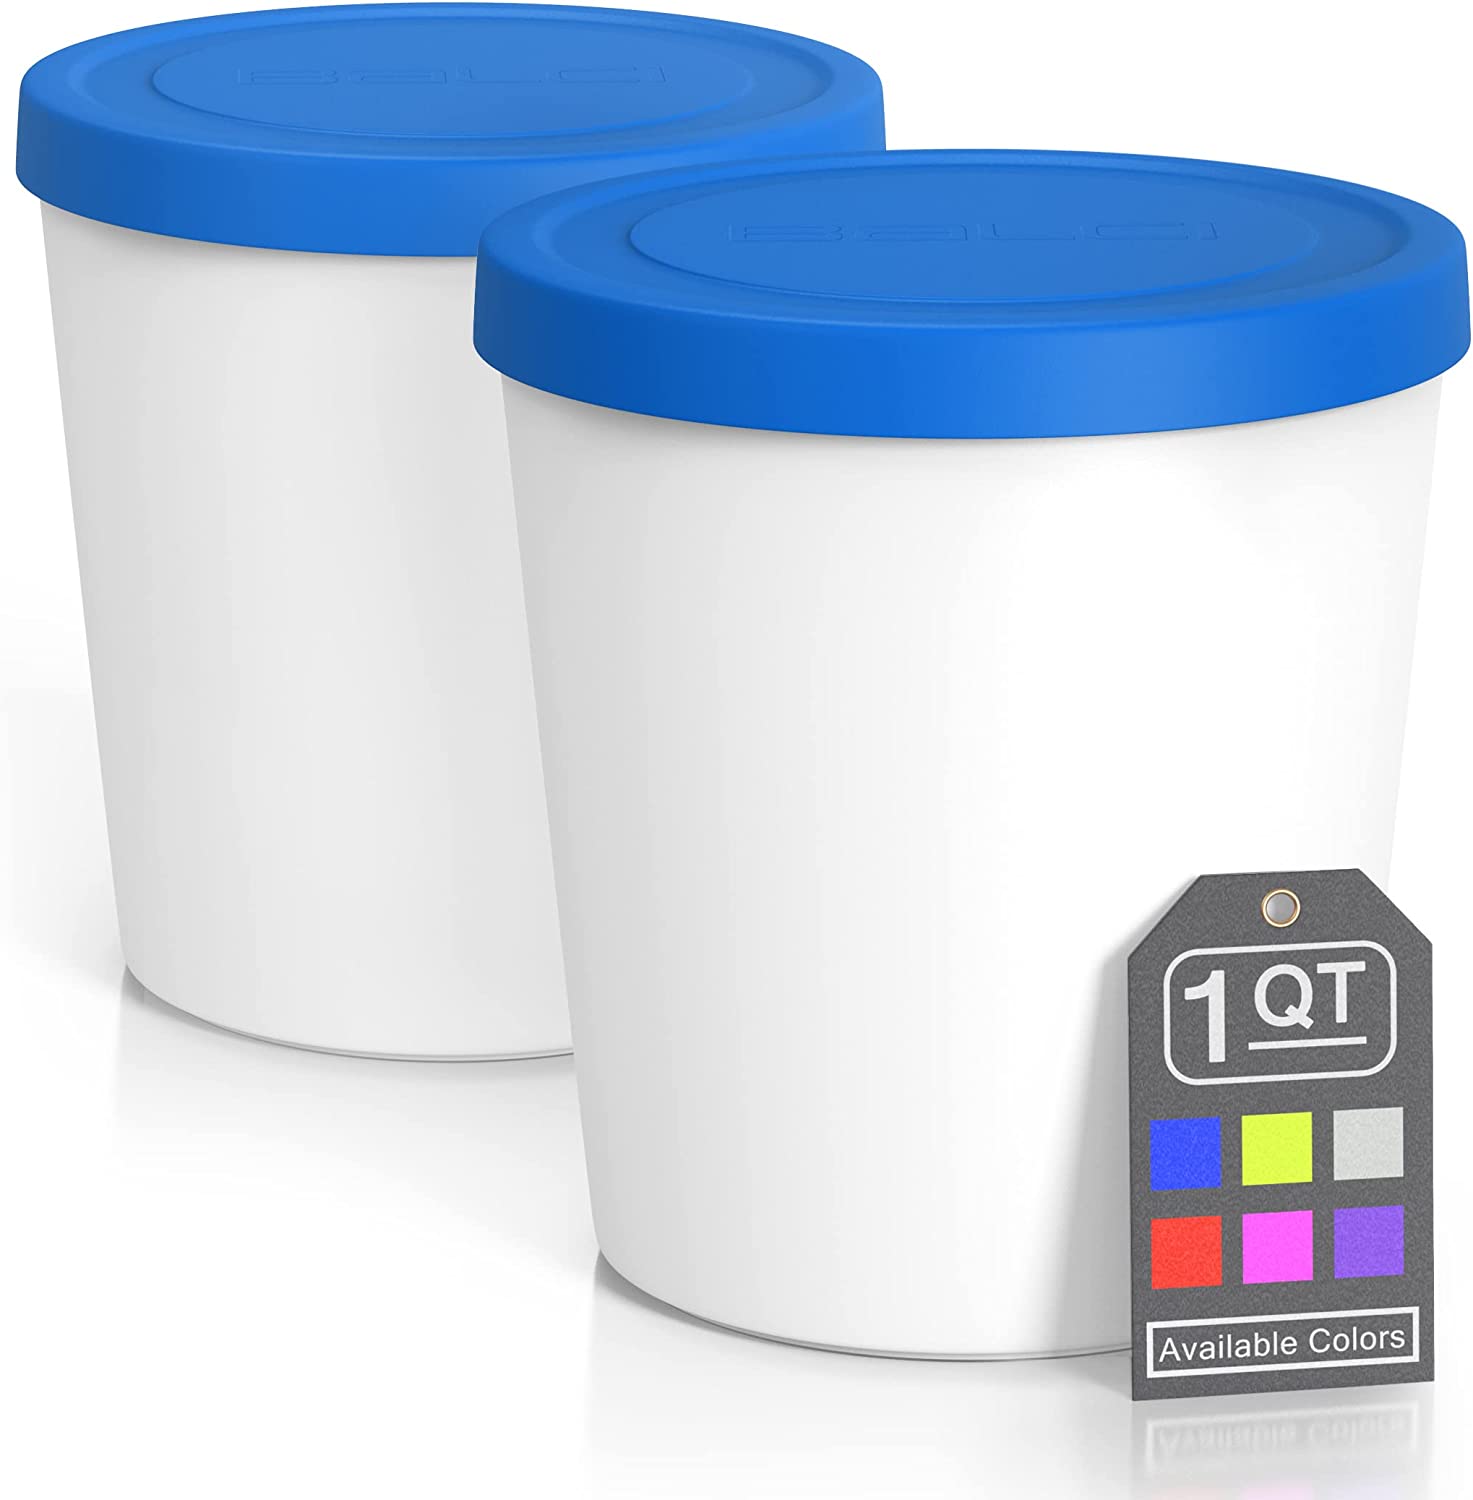 BALCI – Premium Ice Cream Containers (2 Pack – 1 Quart Each) Perfect Freezer Storage Tubs with Lids for Ice Cream, Sorbet and Gelato! – Blue